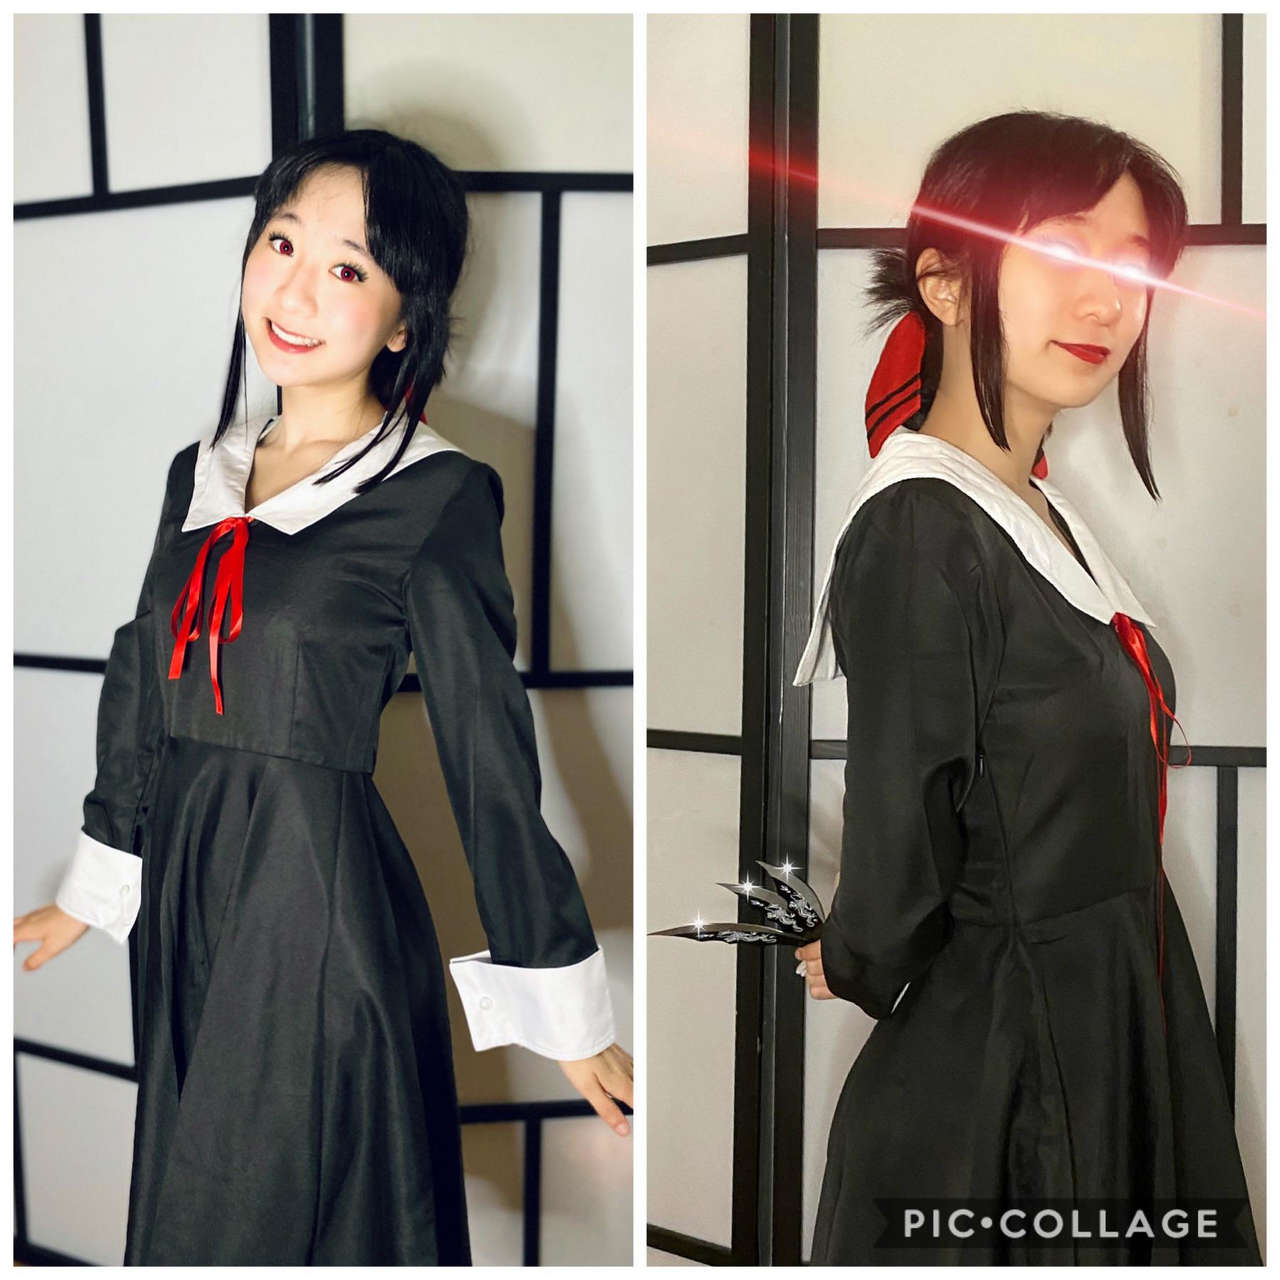 Oc Cosplay The Two Sides Of Kaguy